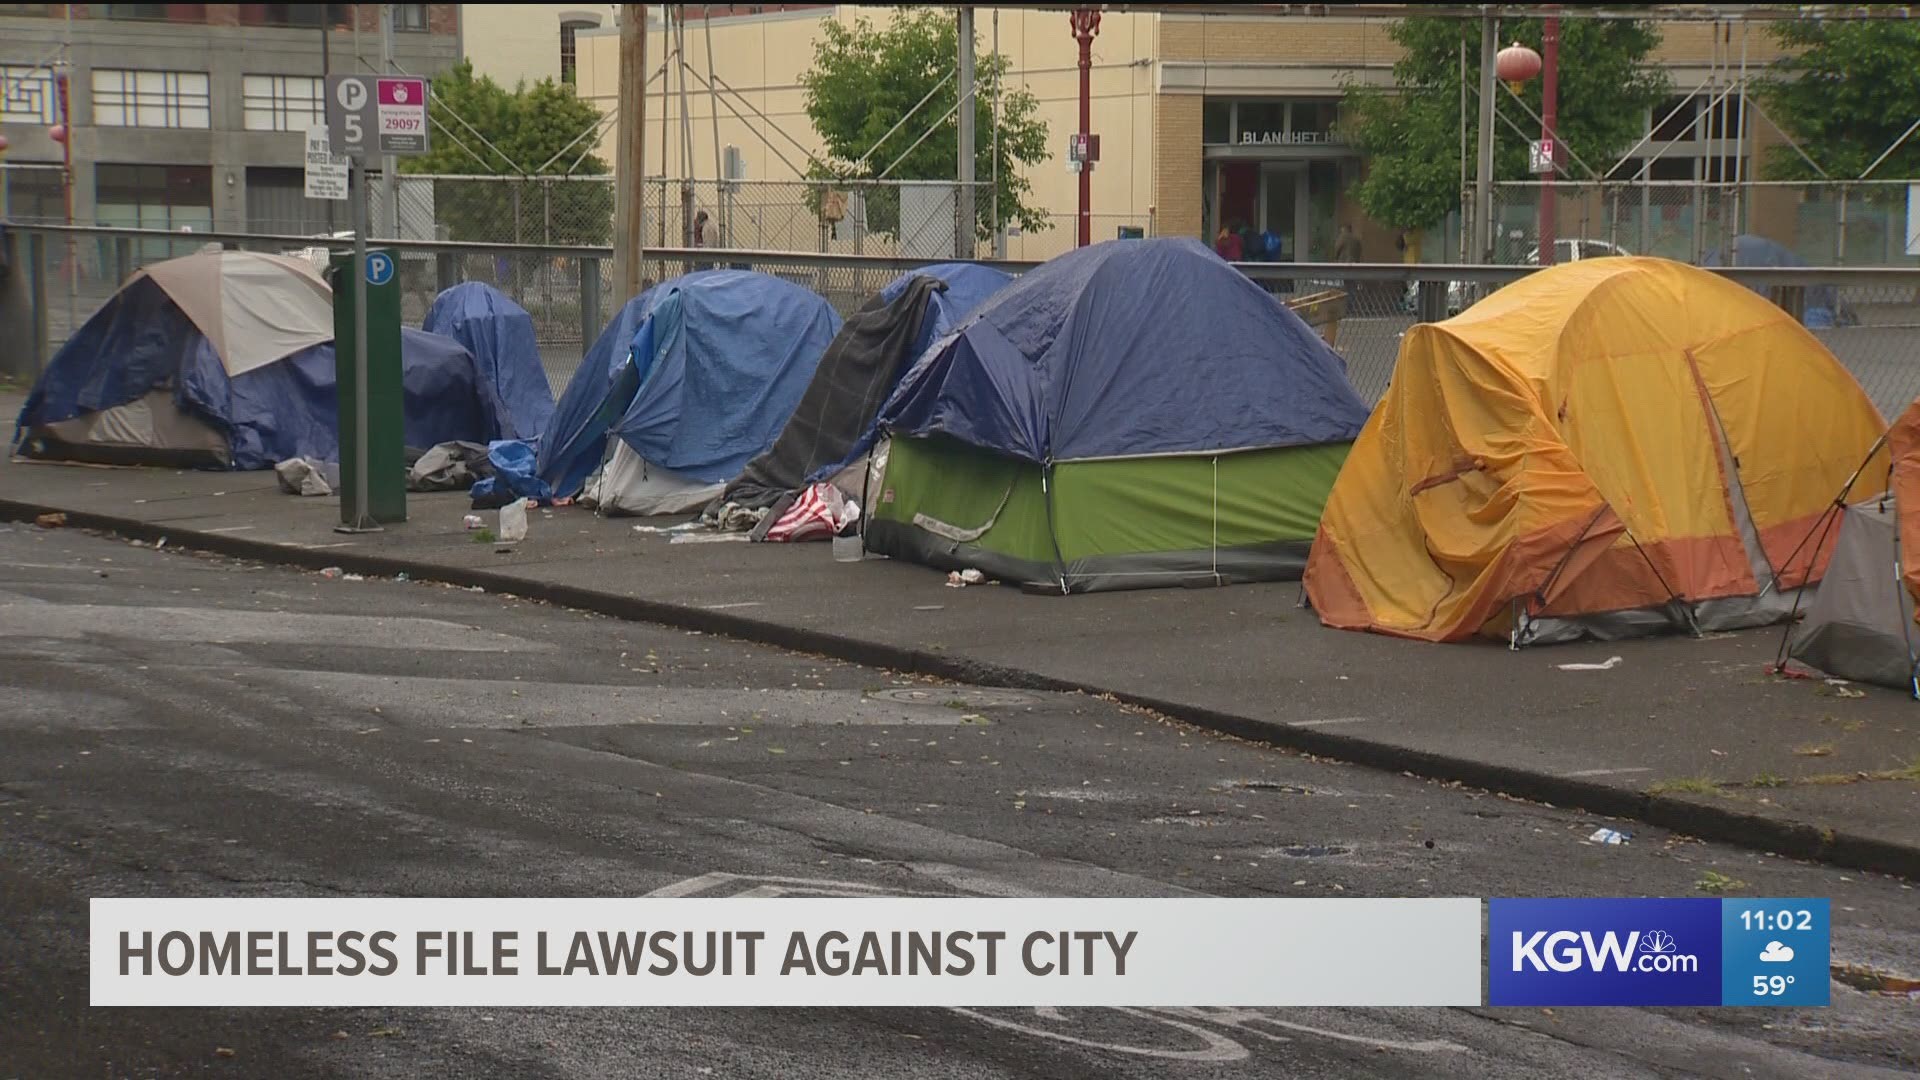 The lawsuit comes as Portland pledges to clear more homeless camps.